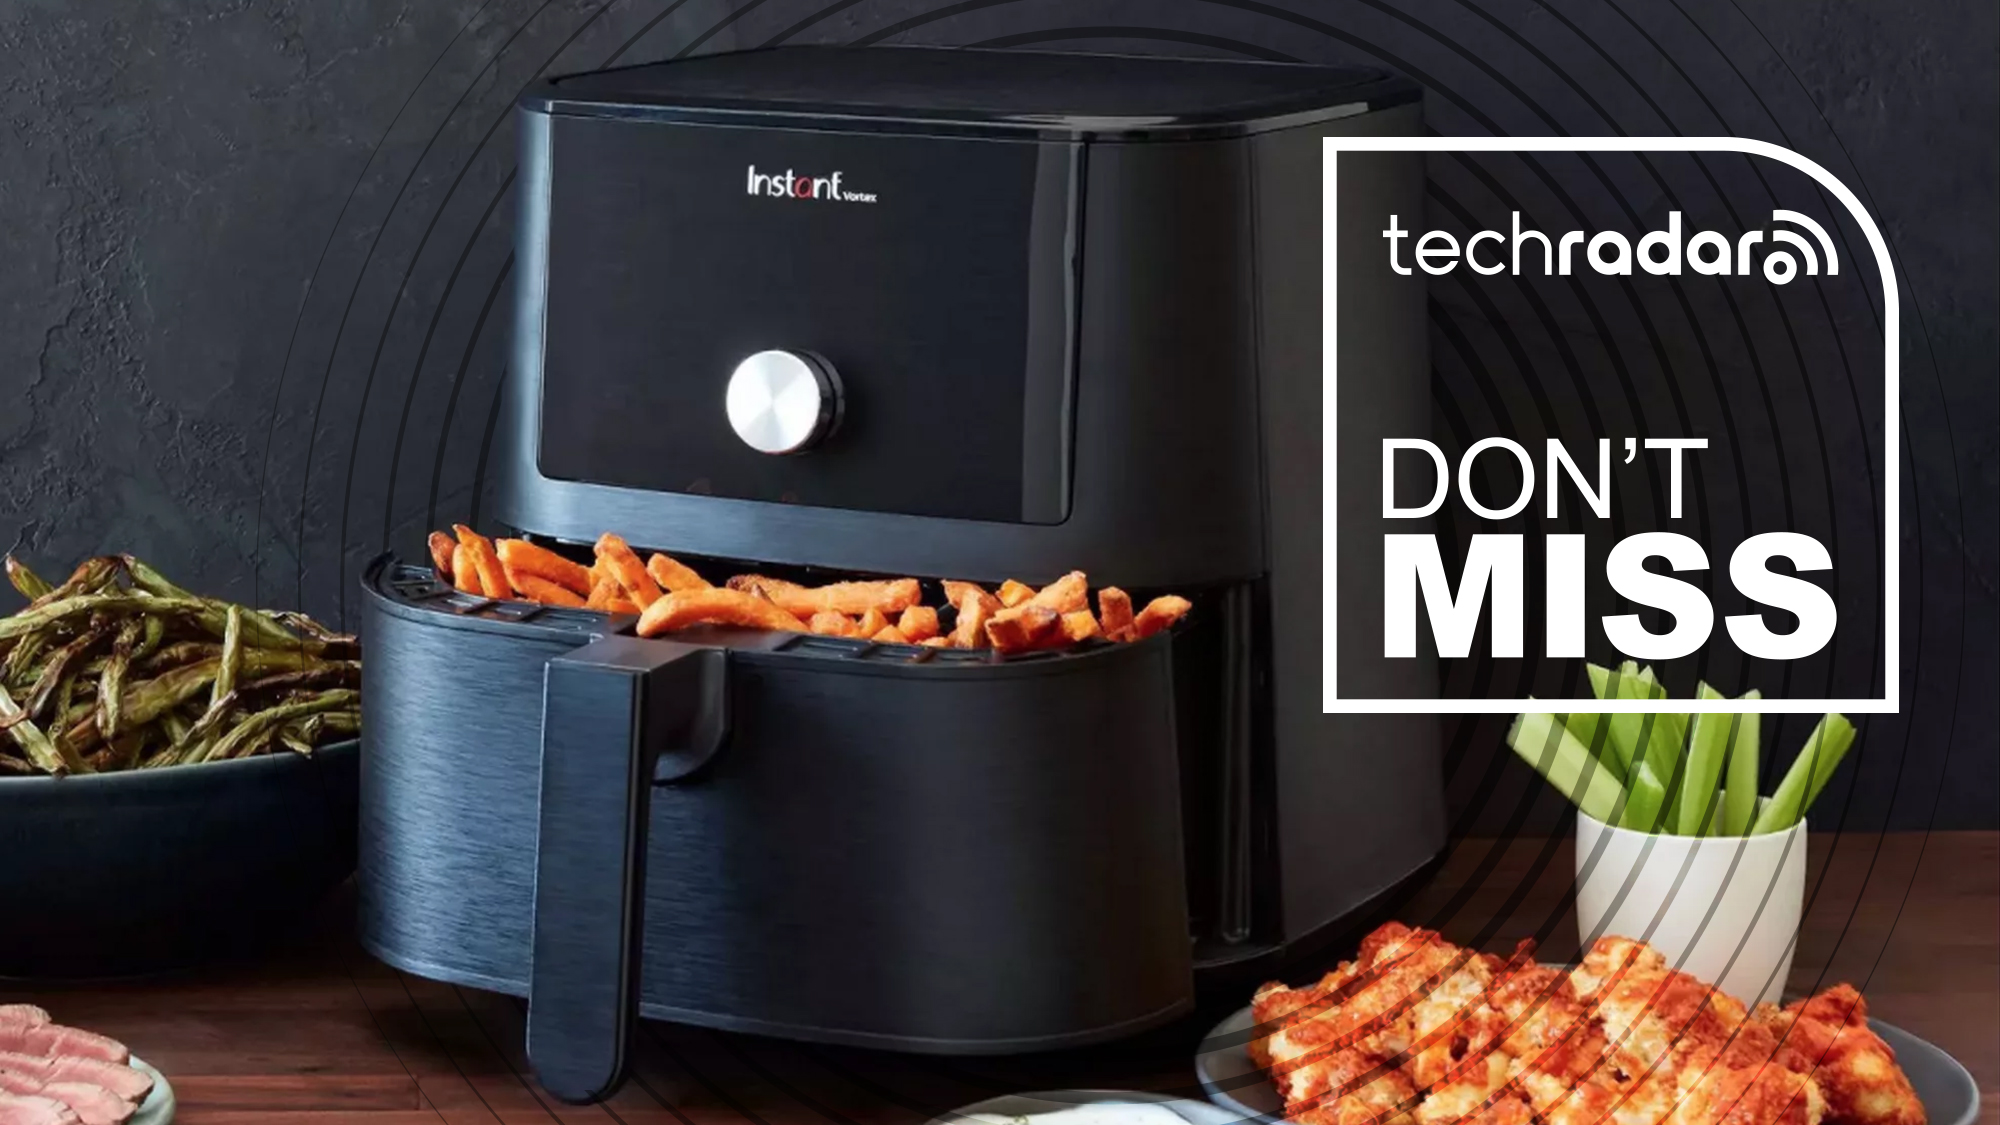 We Can't Believe How Cheap These Air Fryers Are at Best Buy - The